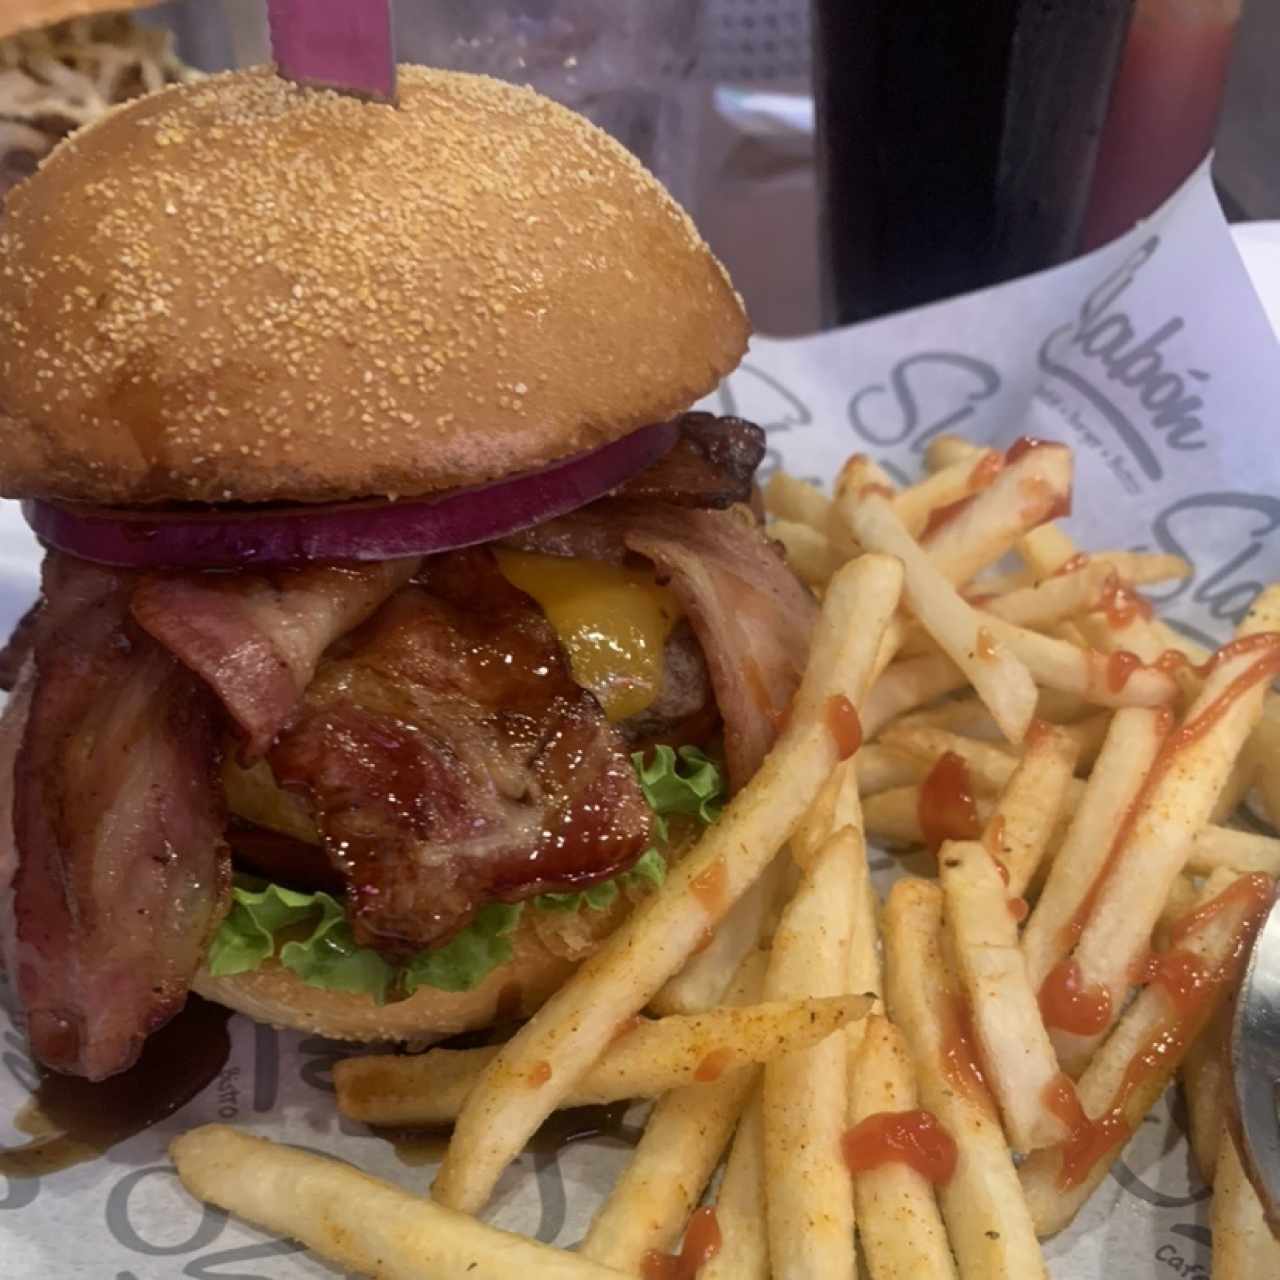 Top Burgers - Bacon Lovers